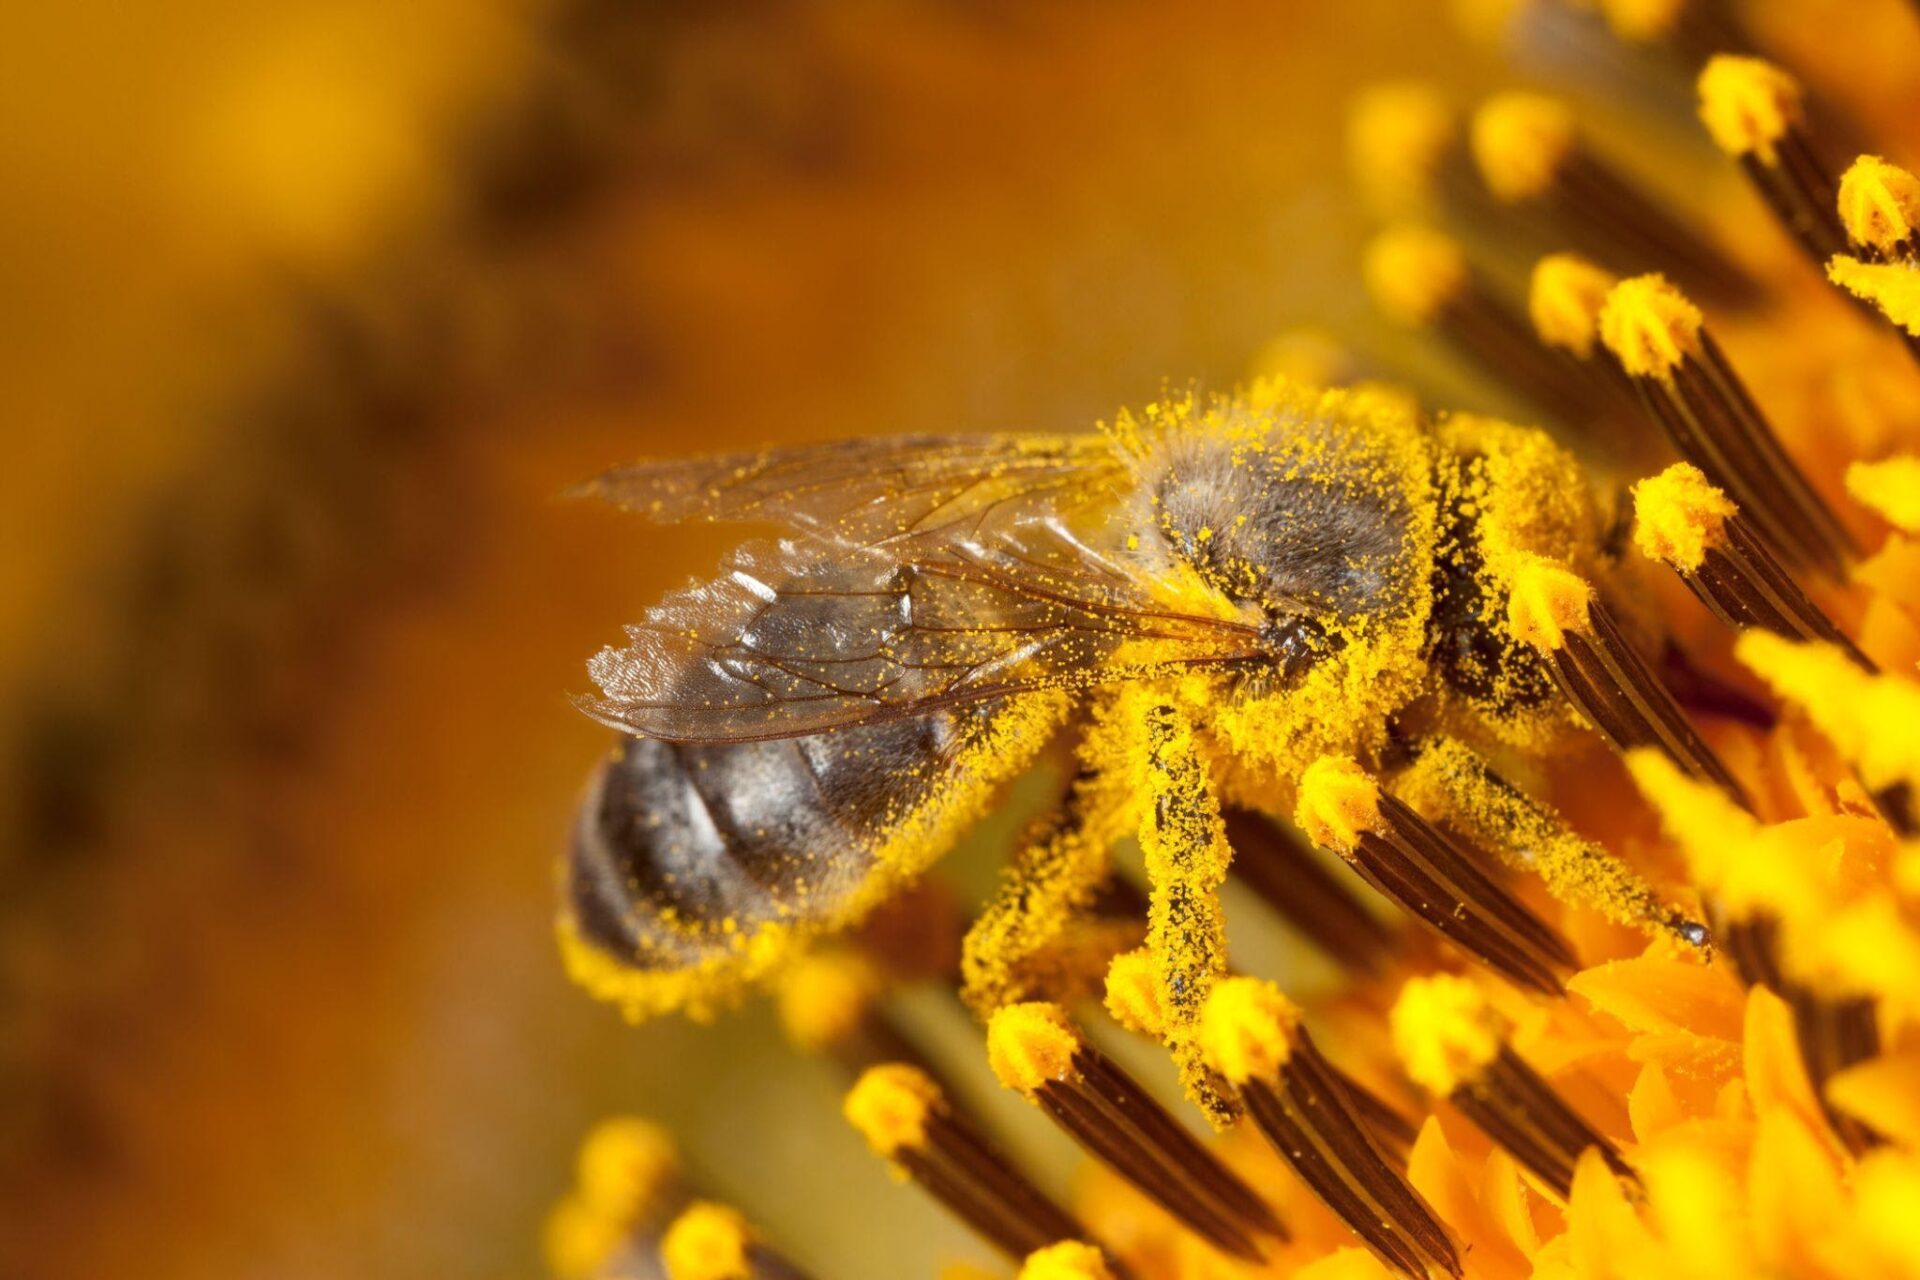 Each flower will result in honey with a specific taste, colour, and texture.